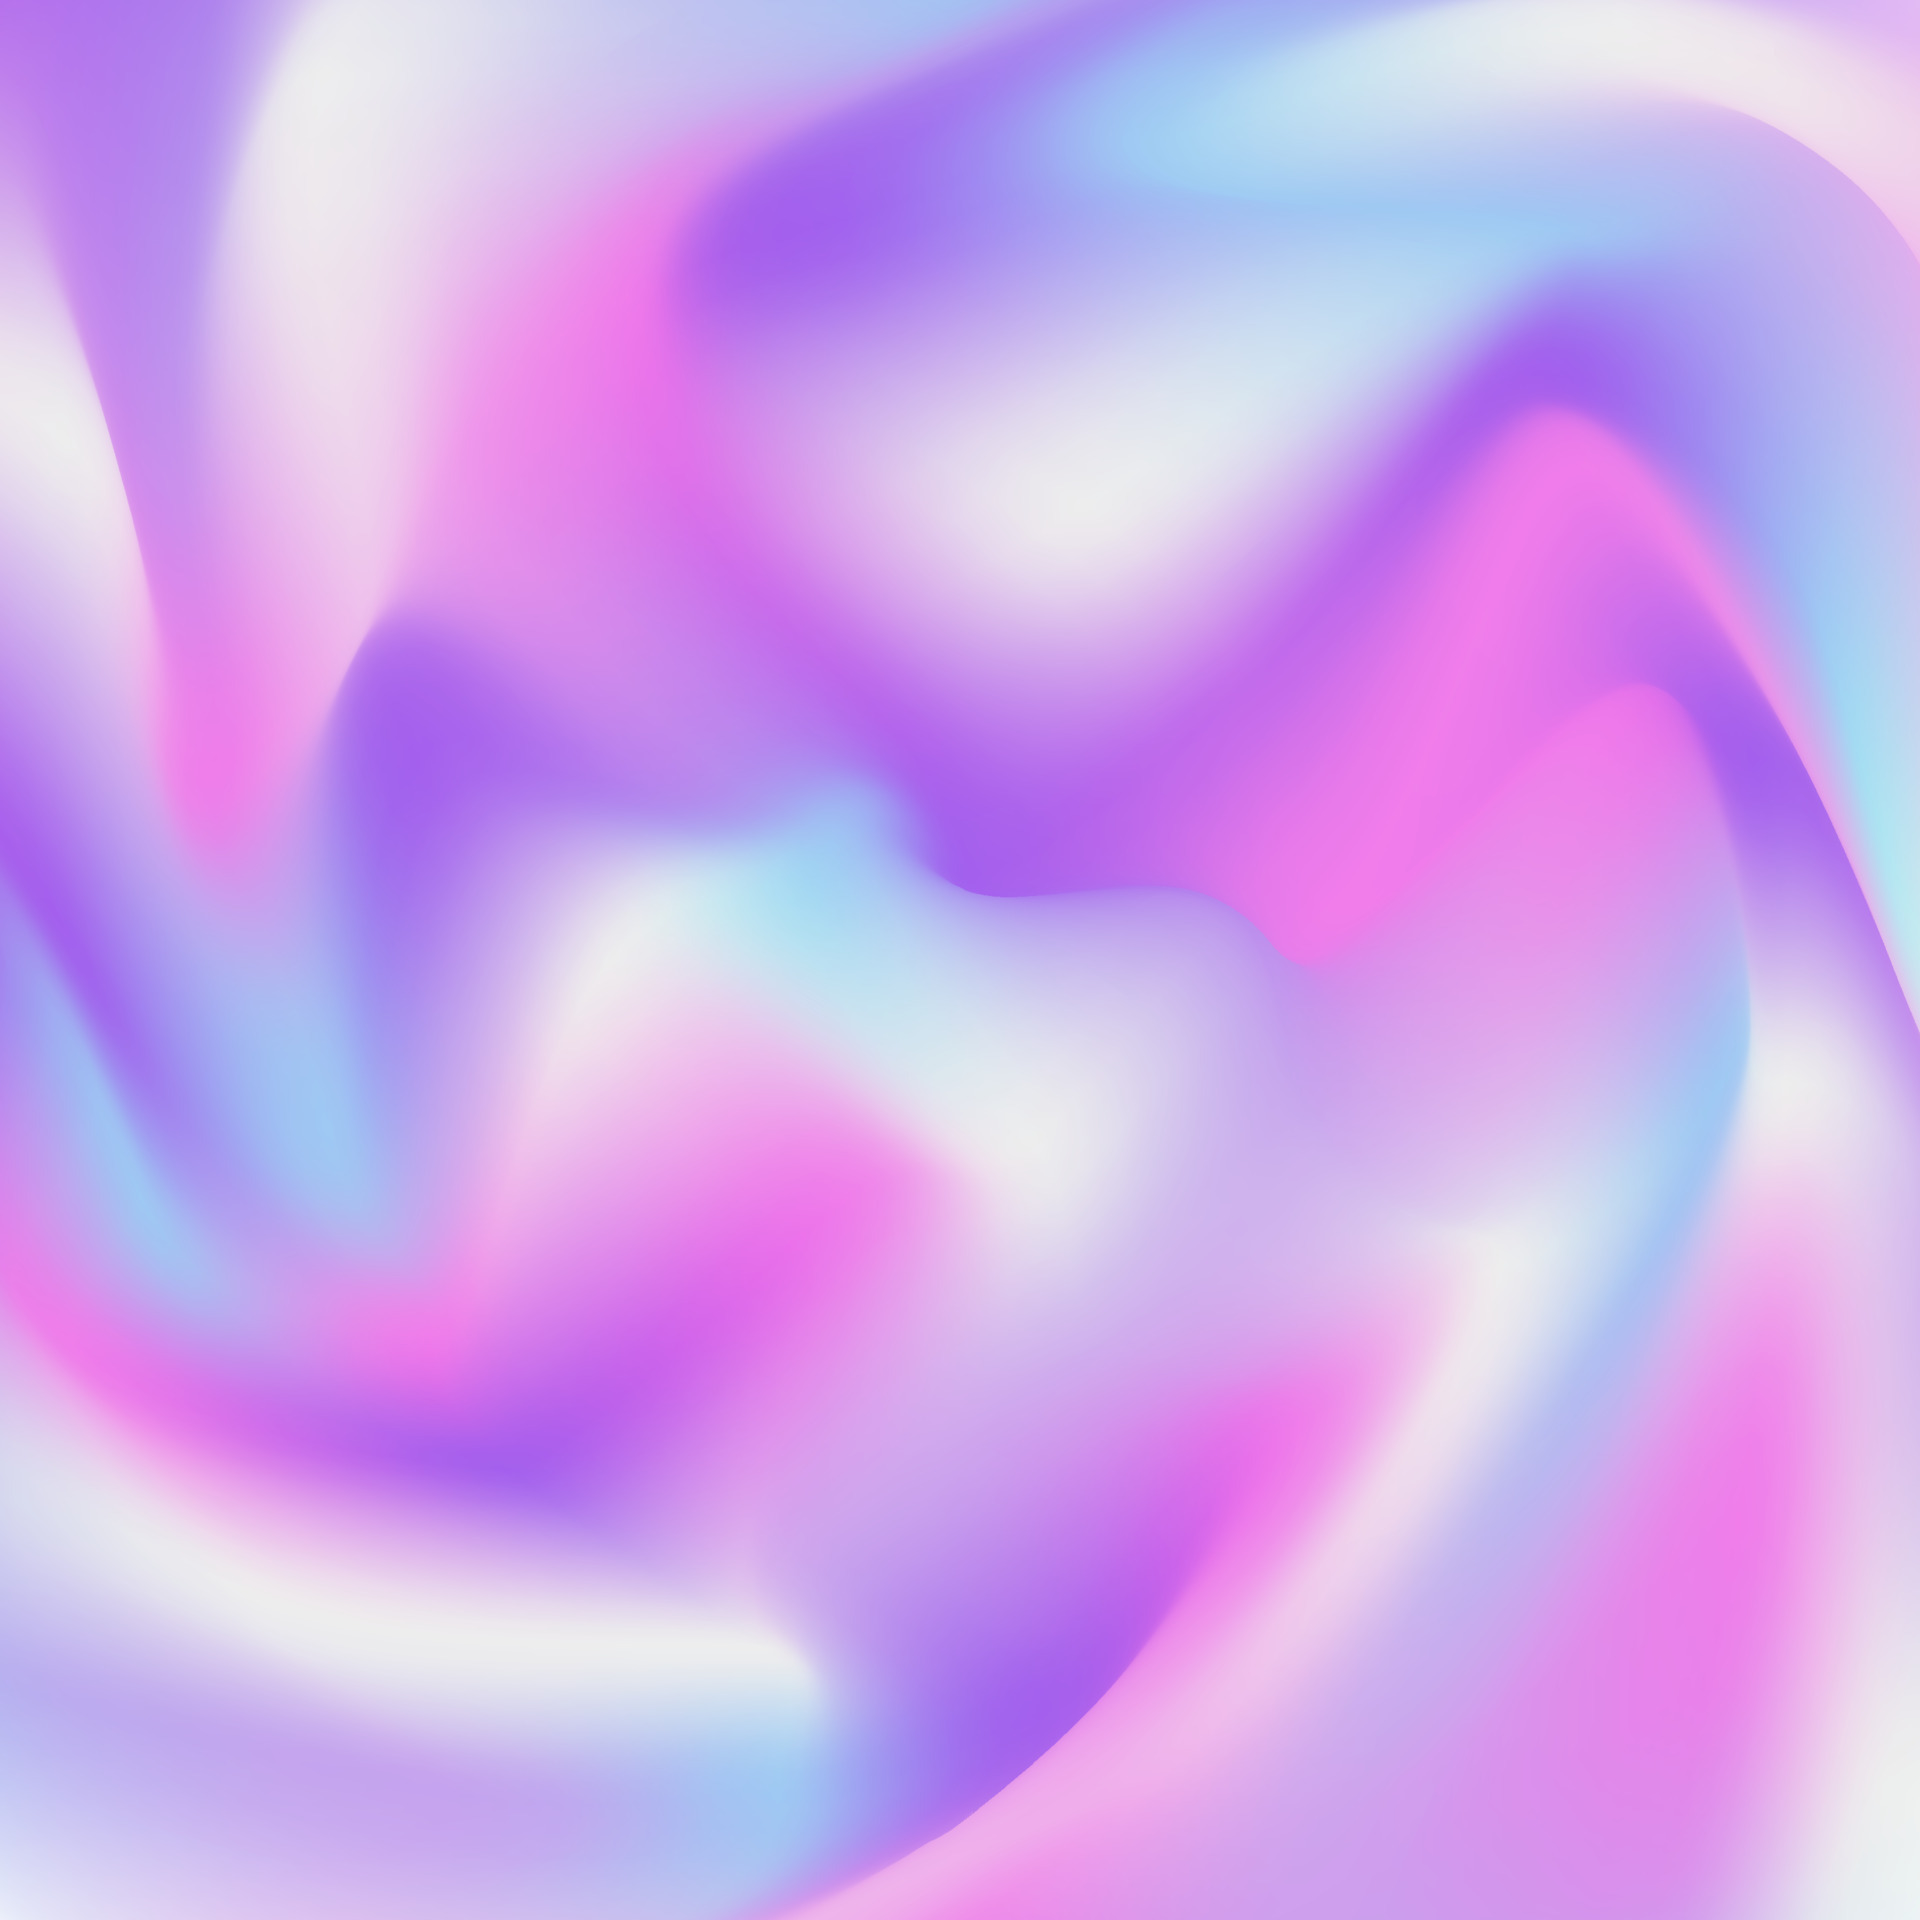 https://static.vecteezy.com/system/resources/previews/011/319/813/original/abstract-gradient-mesh-background-pastel-colors-and-blur-pink-purple-blue-grey-color-gradient-background-vector.jpg